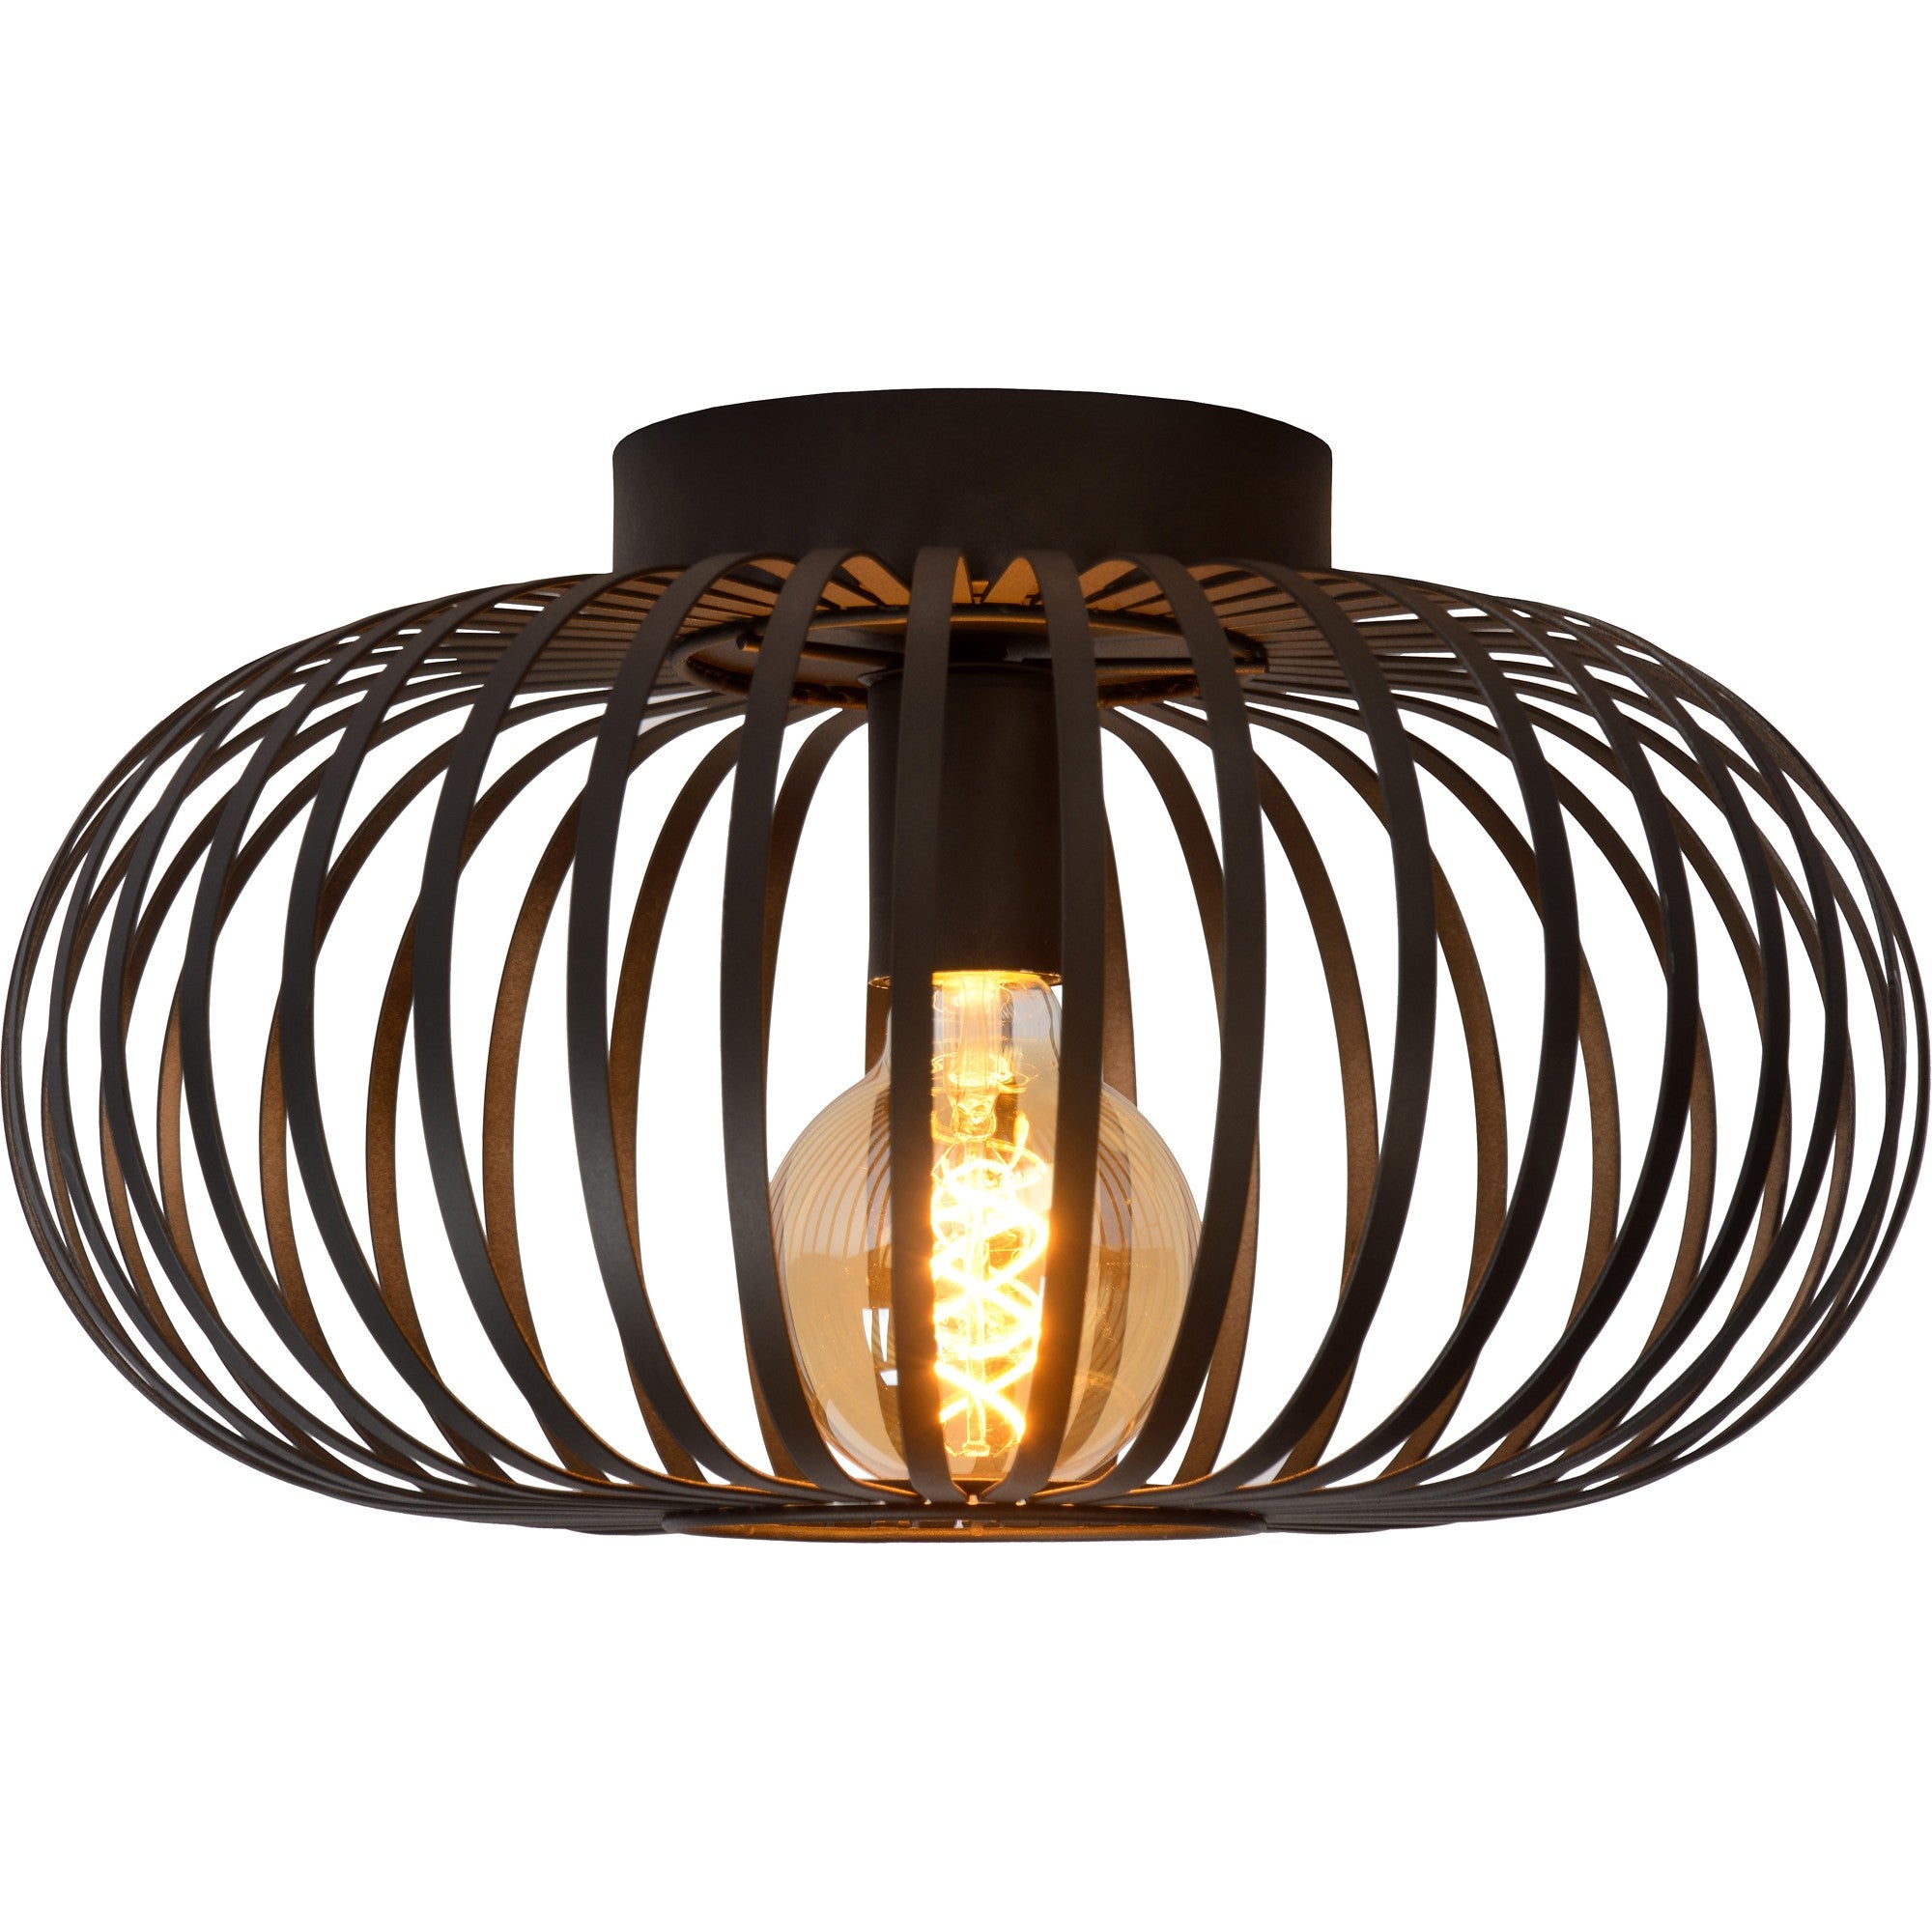 Renwil | Ivy | Ceiling Fixture | Modern Contemporary Industrial Style